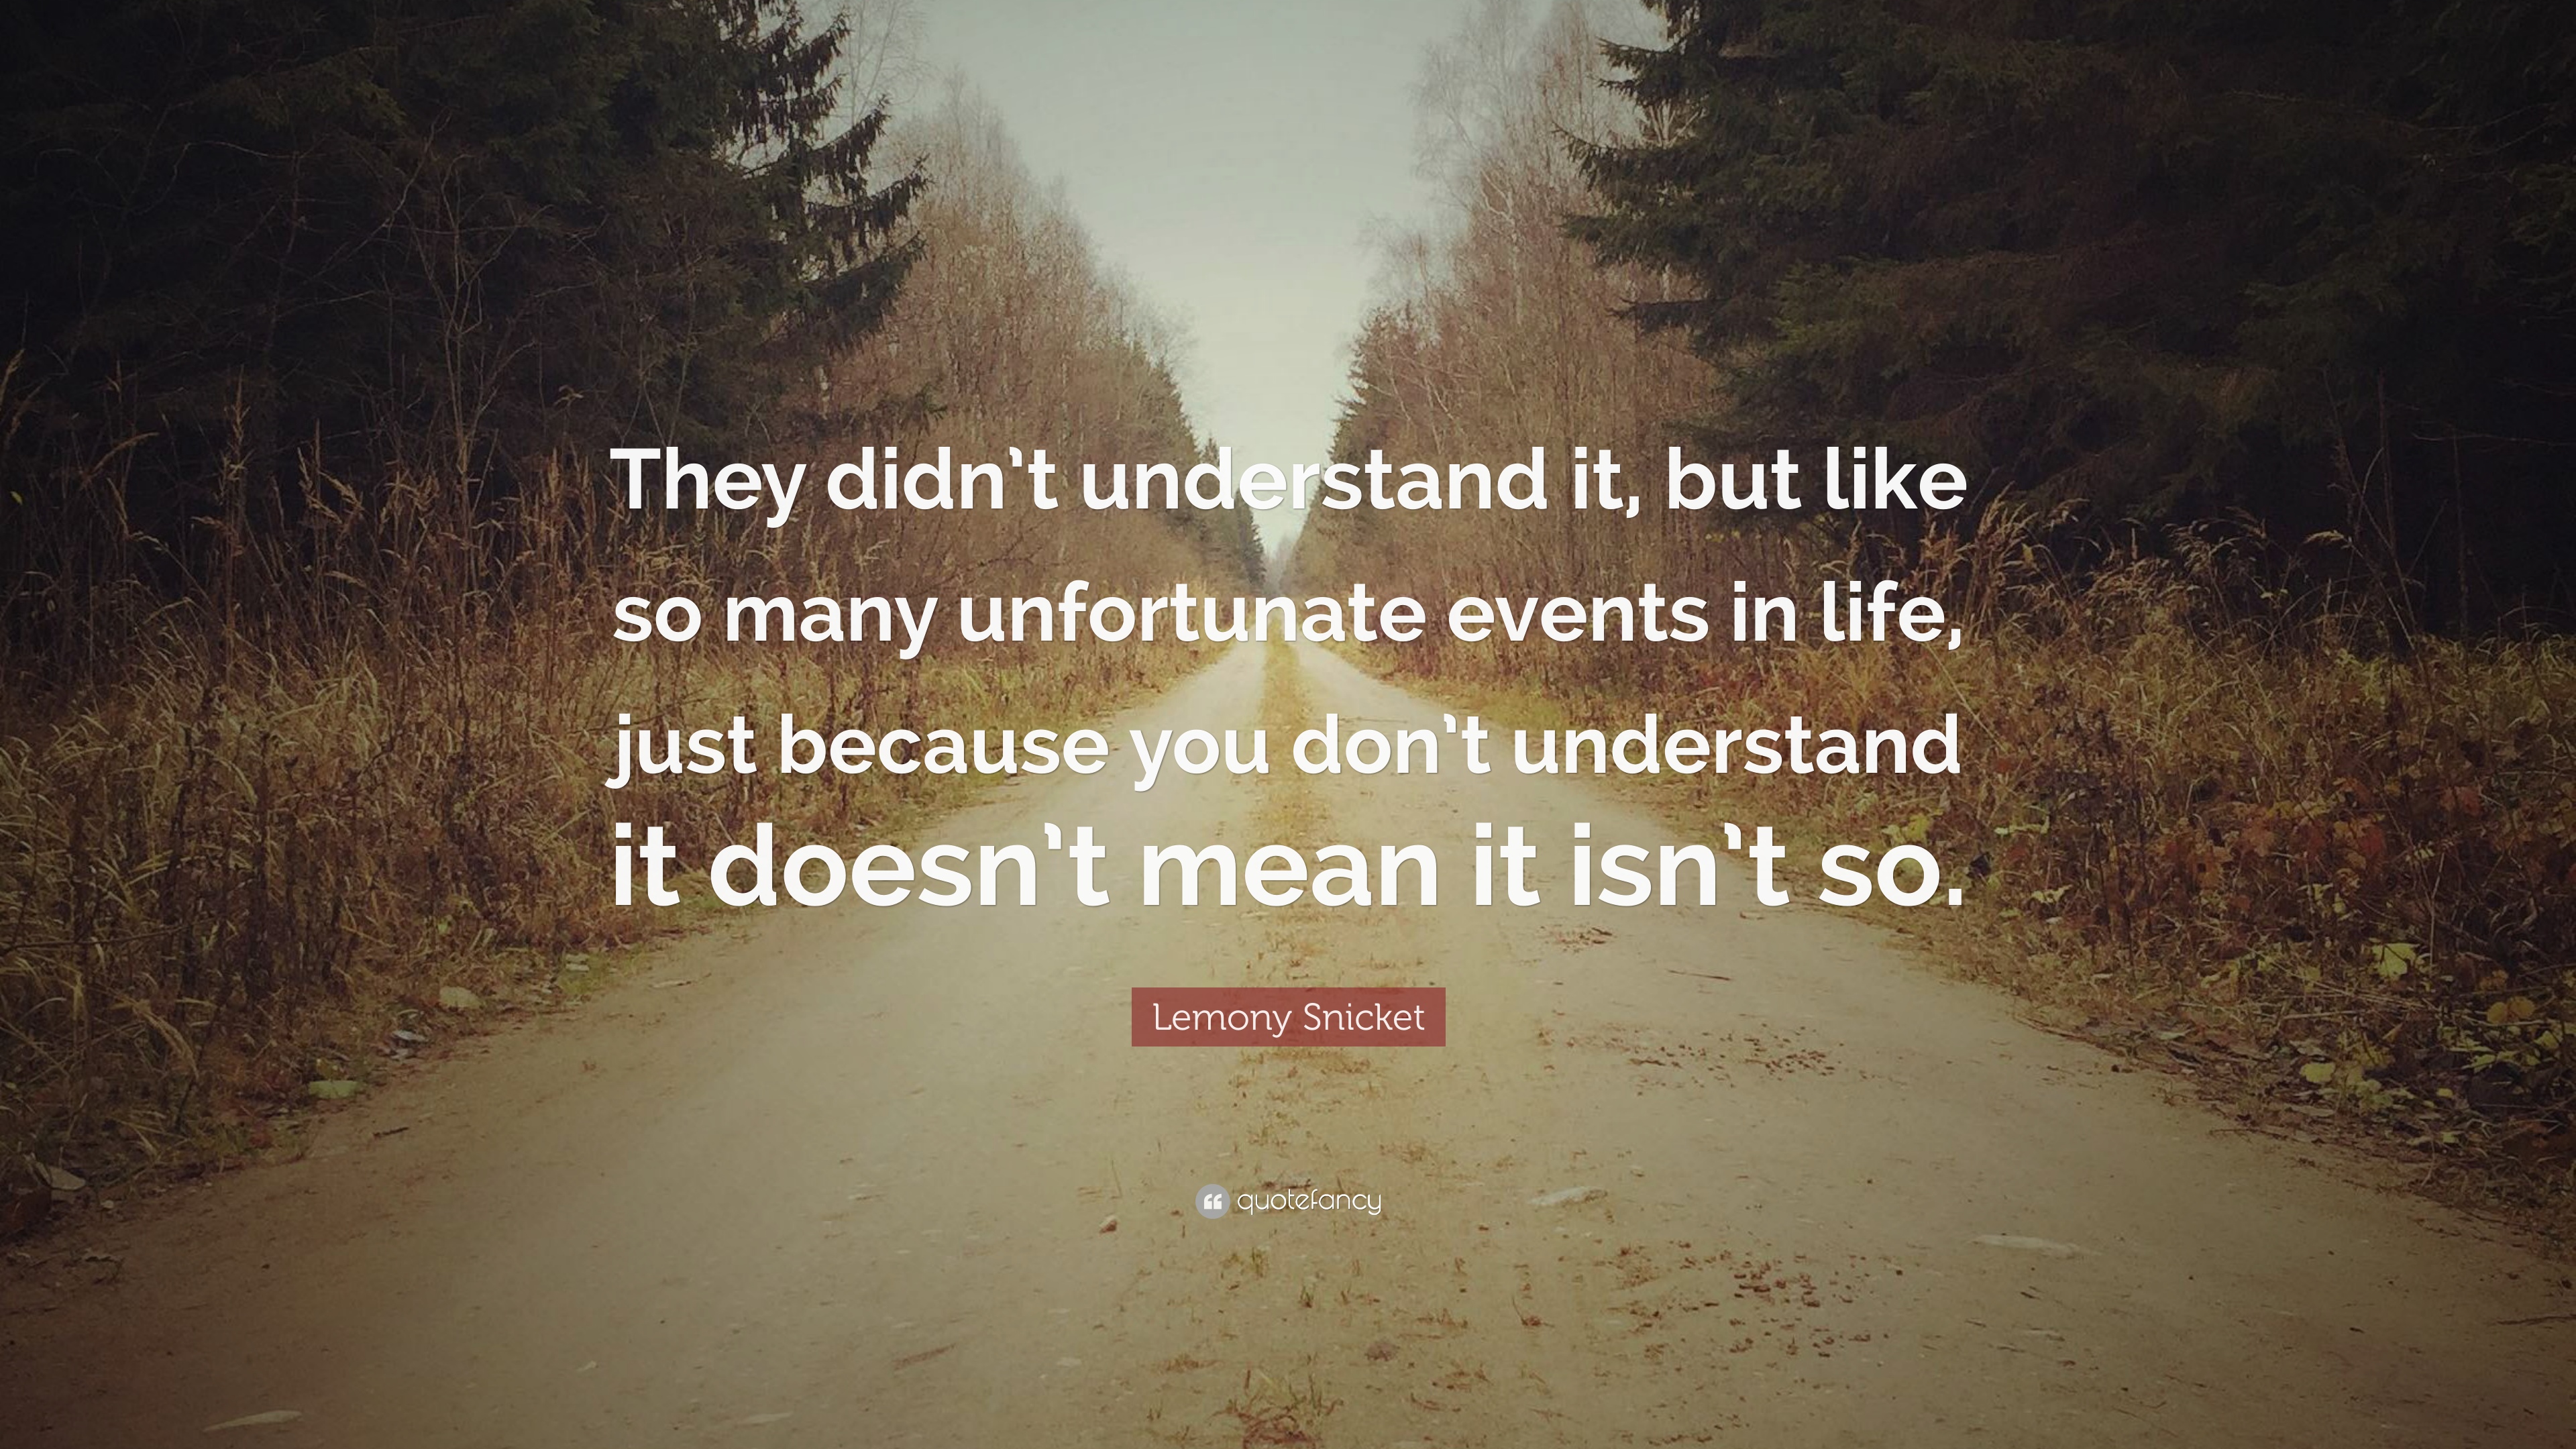 Lemony Snicket Quote: “They didn't understand it, but like so many ...